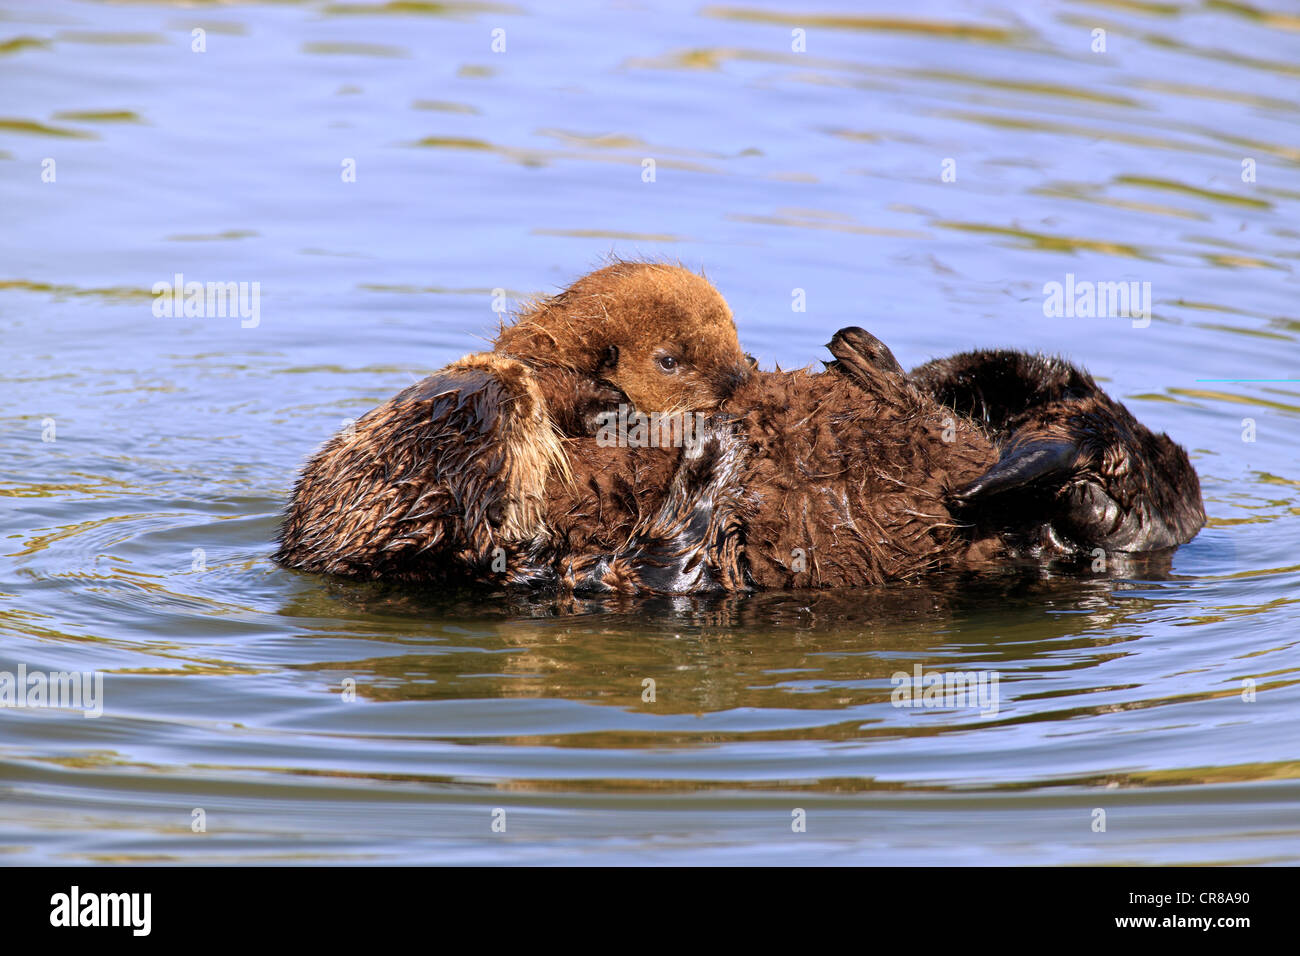 Sea otters (Enhydra lutris), female adult with young in the water, Monterey, California, USA, America Stock Photo